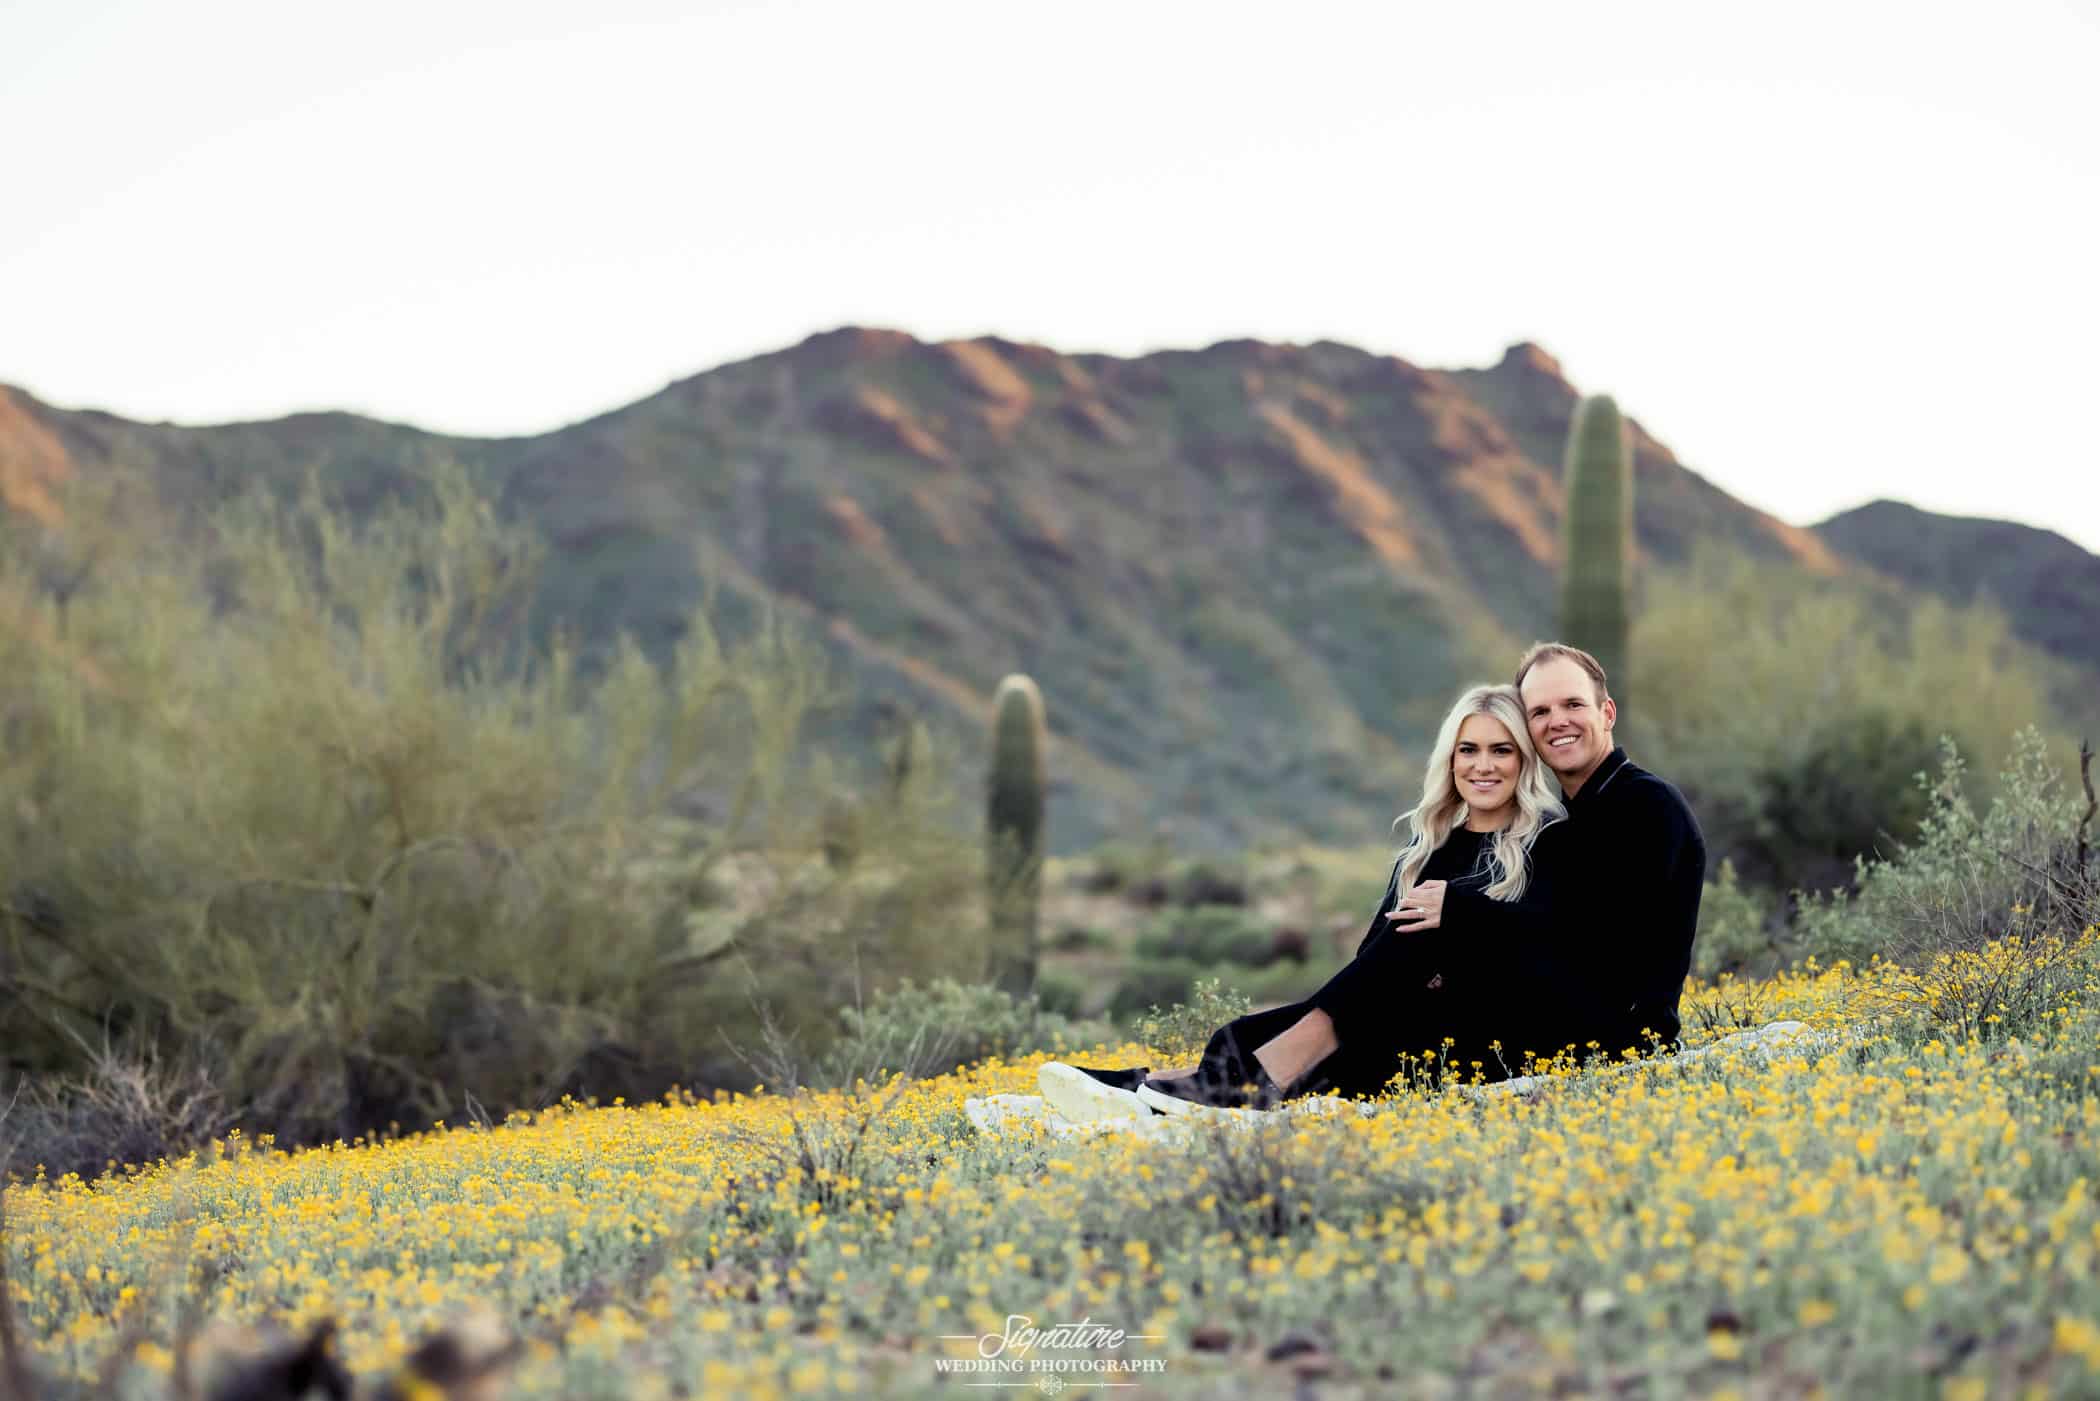 Couple sitting together in front of desert mountain